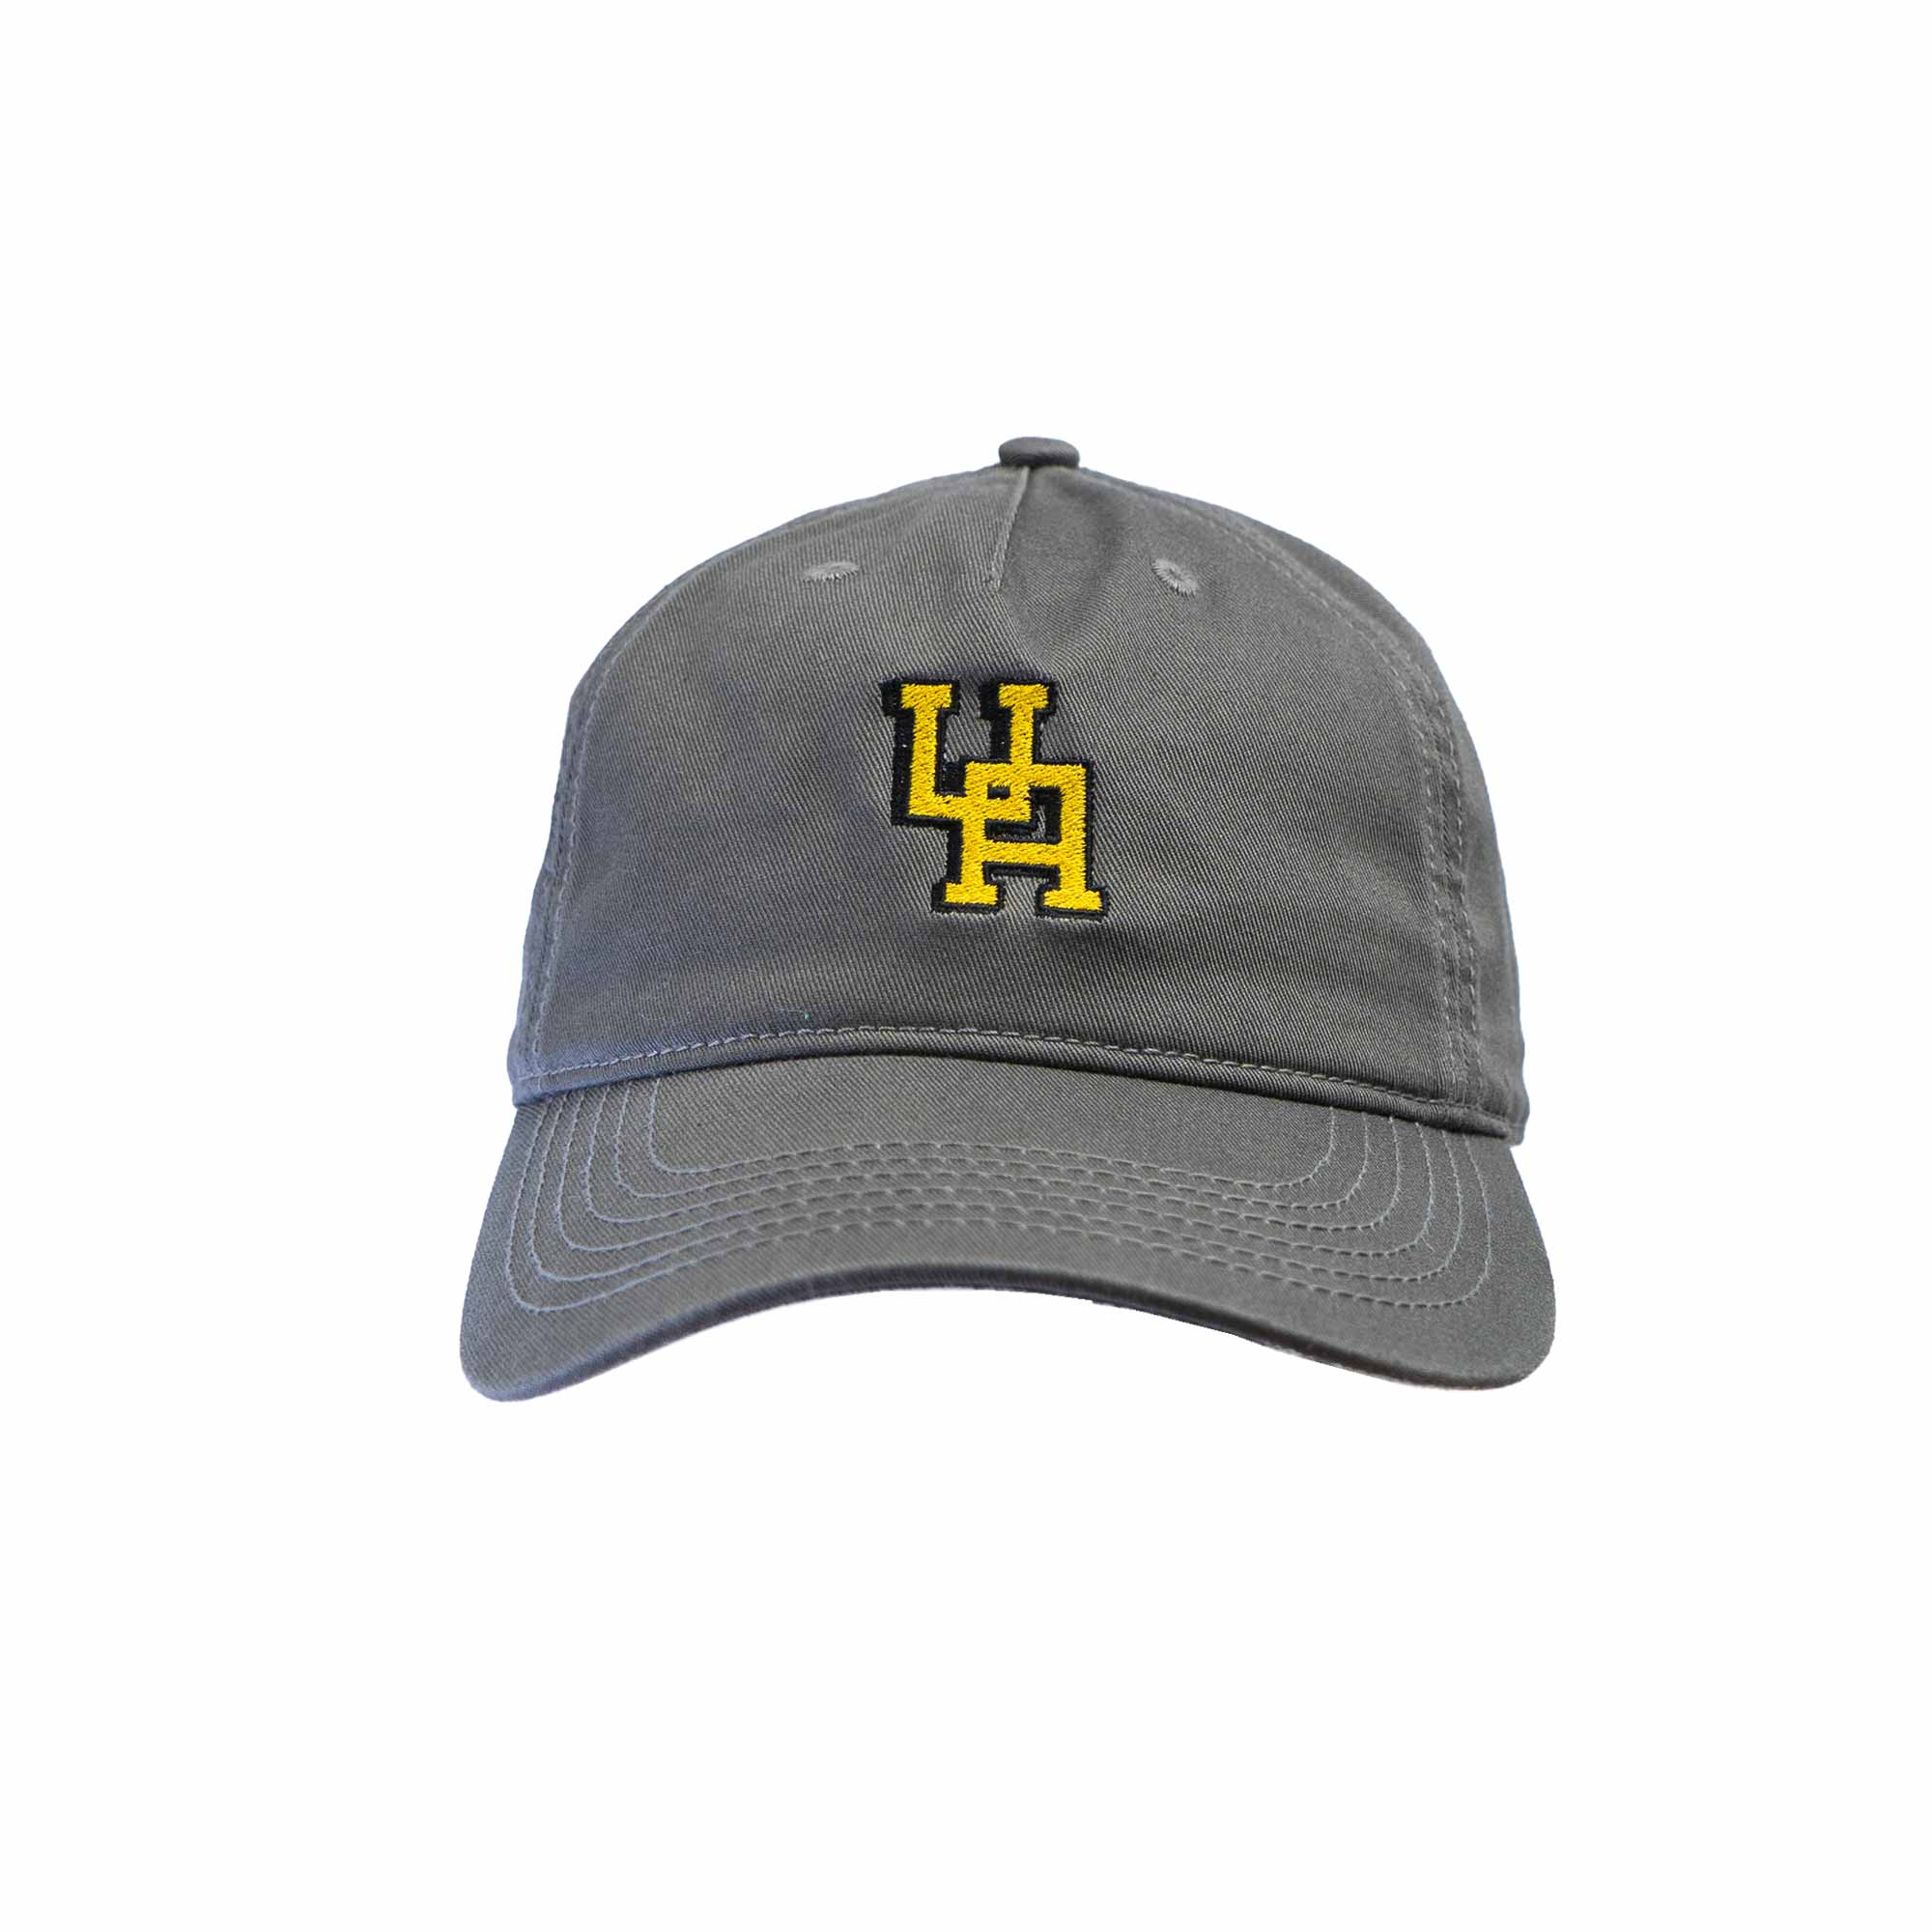 Upper Arlington embroidered UA charcoal dad hat. Officially Licensed and embroidered in Upper Arlington. 100% organic cotton unstructured hat. One size fits most.